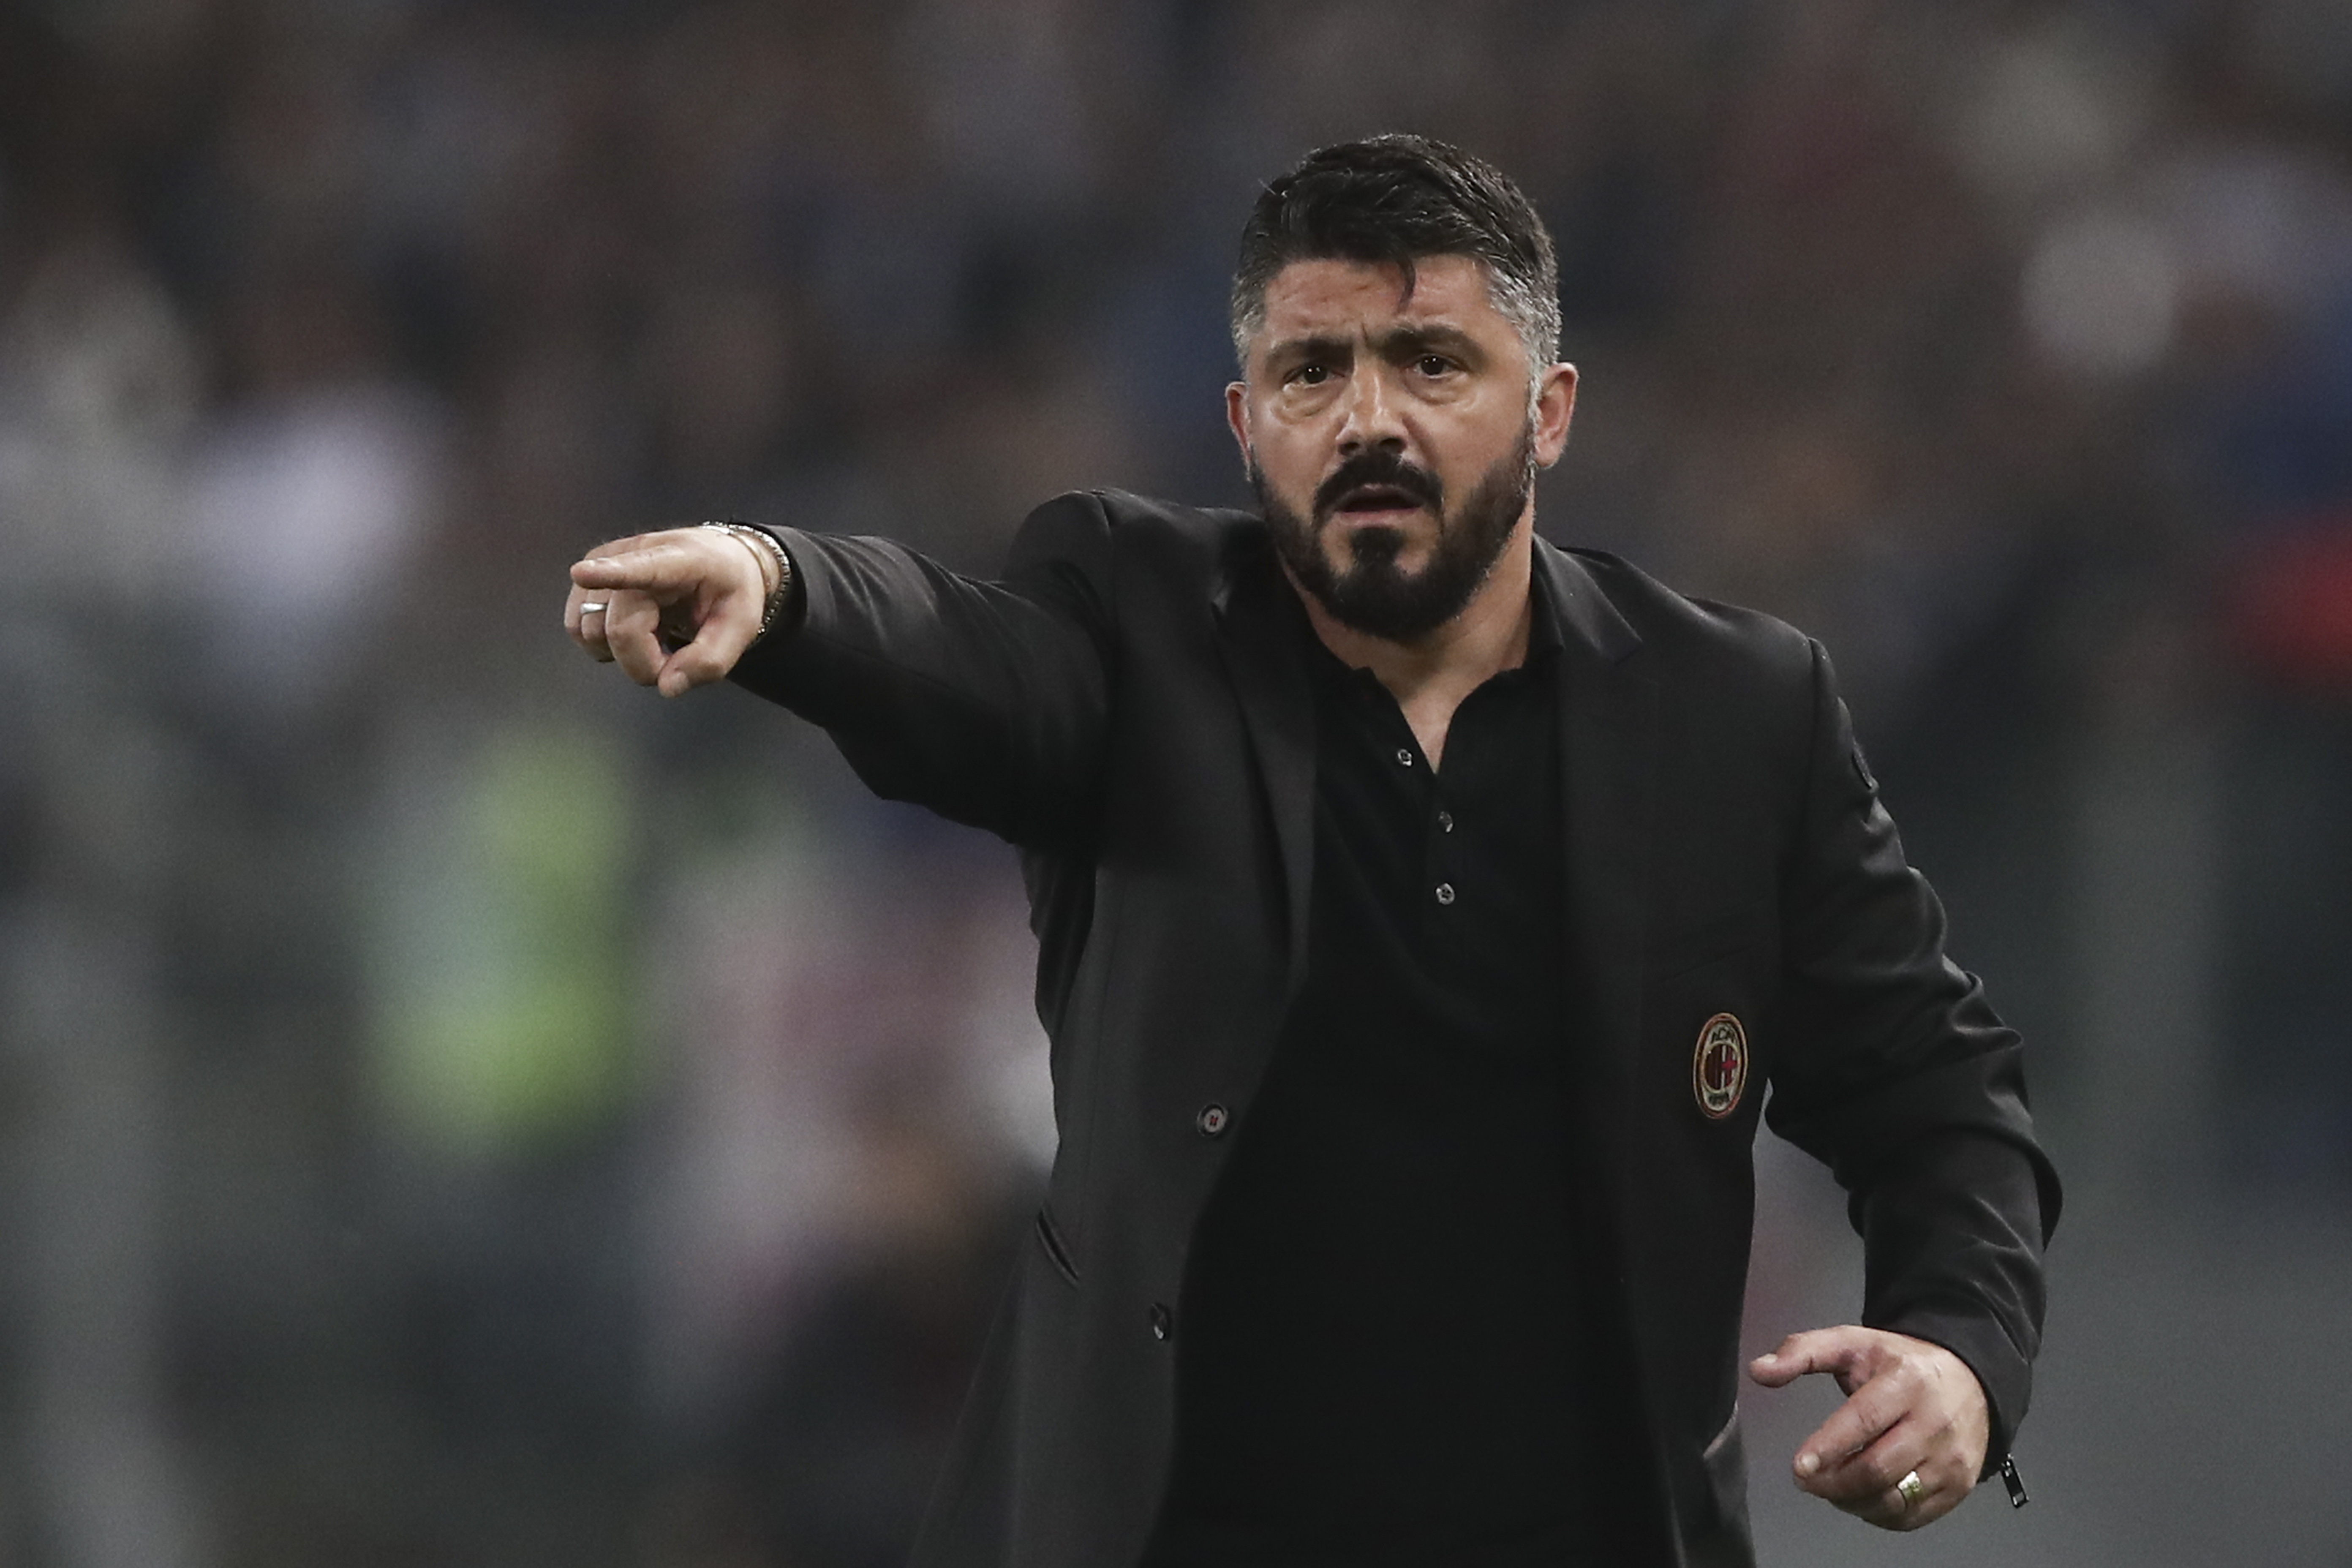 AC Milan's coach from Italy Gennaro Gattuso reacts during the Italian Tim Cup (Coppa Italia) final Juventus vs AC Milan at the Olympic stadium on May 9, 2018 in Rome. (Photo by Isabella BONOTTO / AFP) (Photo credit should read ISABELLA BONOTTO/AFP/Getty Images)